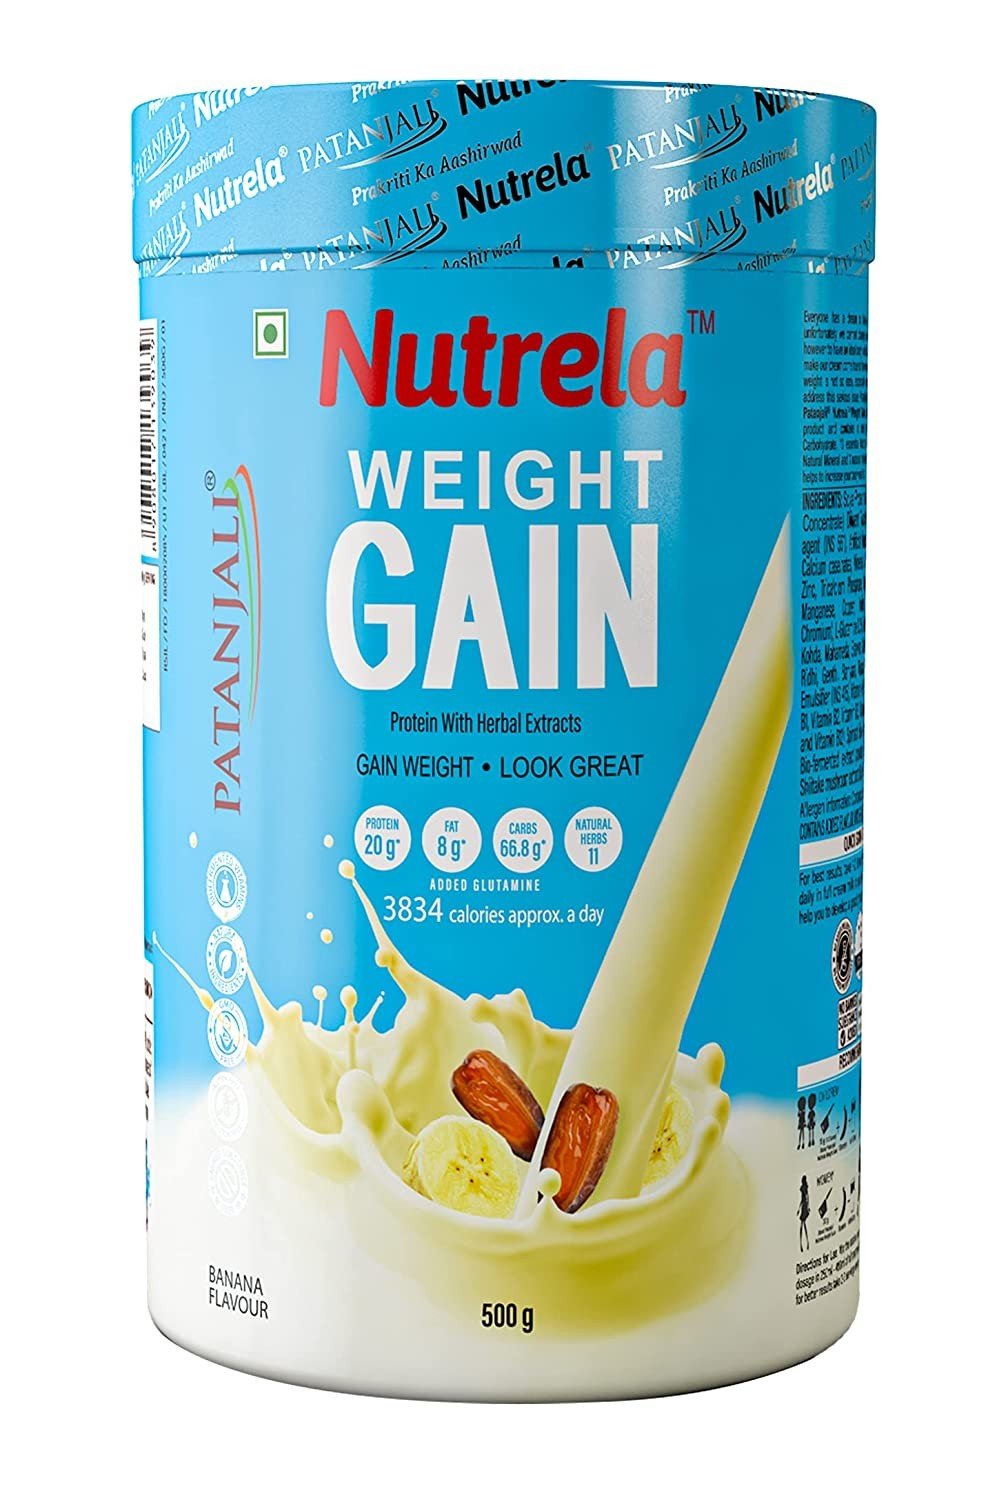 Nutrela Weight Gain( 500g ) Achieving The Ideal Body Weight, Protein, Fat, Carbohydrate, Vitamins, Minerals - Banana Flavour